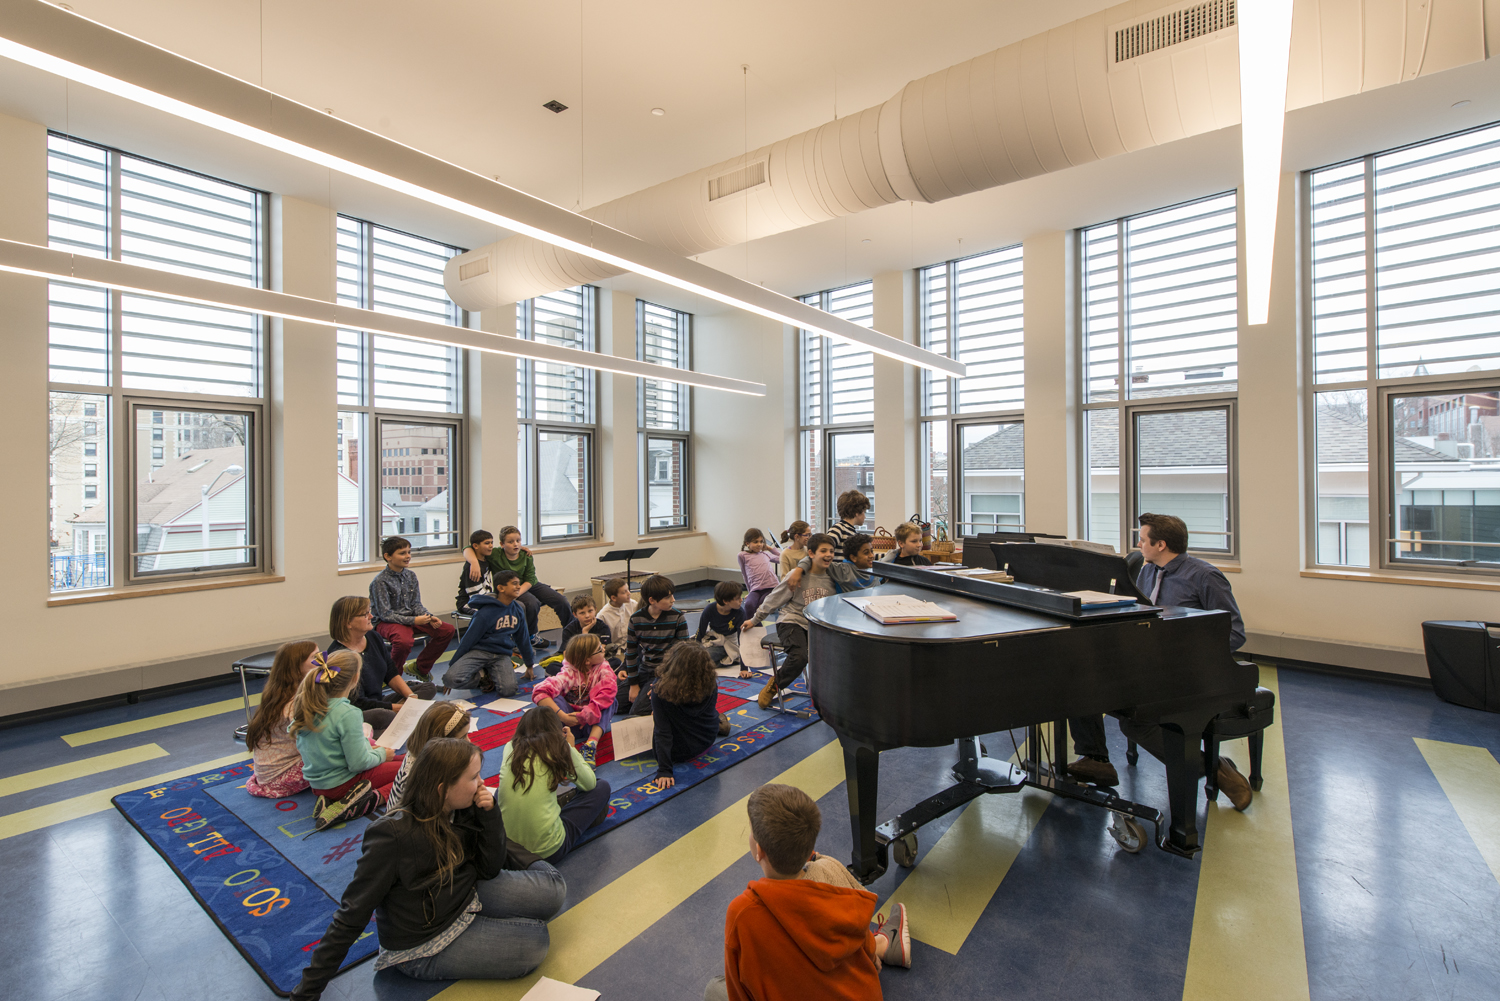 Wheeler School Music Room, a teacher plays piano to a group of young students